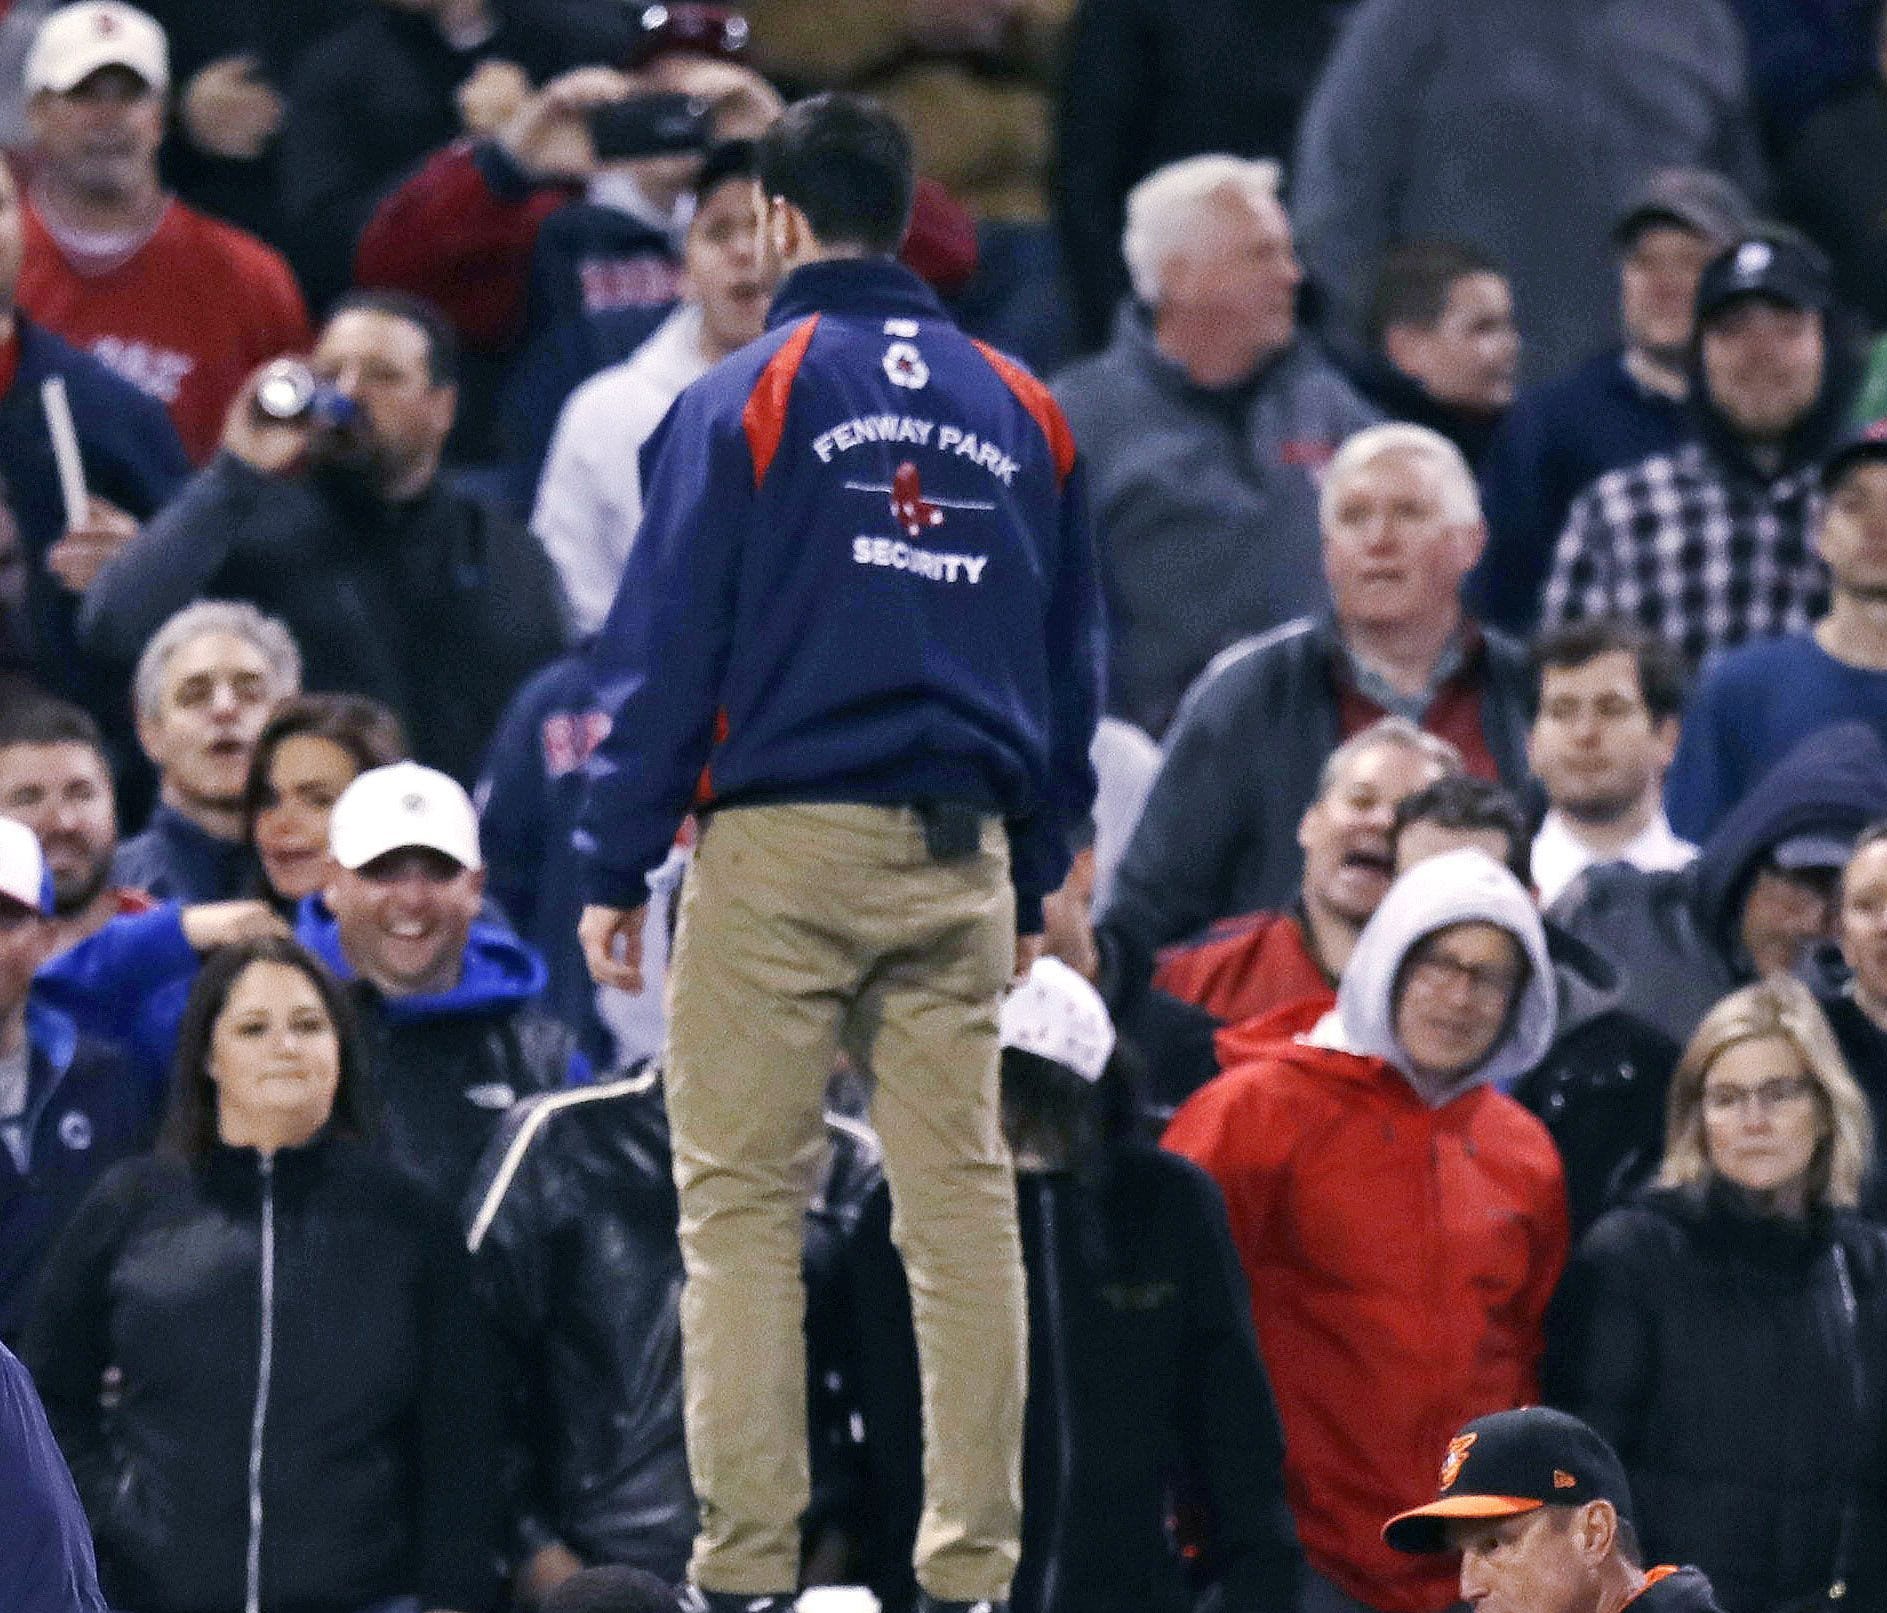 Security guard stands on the dugout roof as Red Sox fans watch.